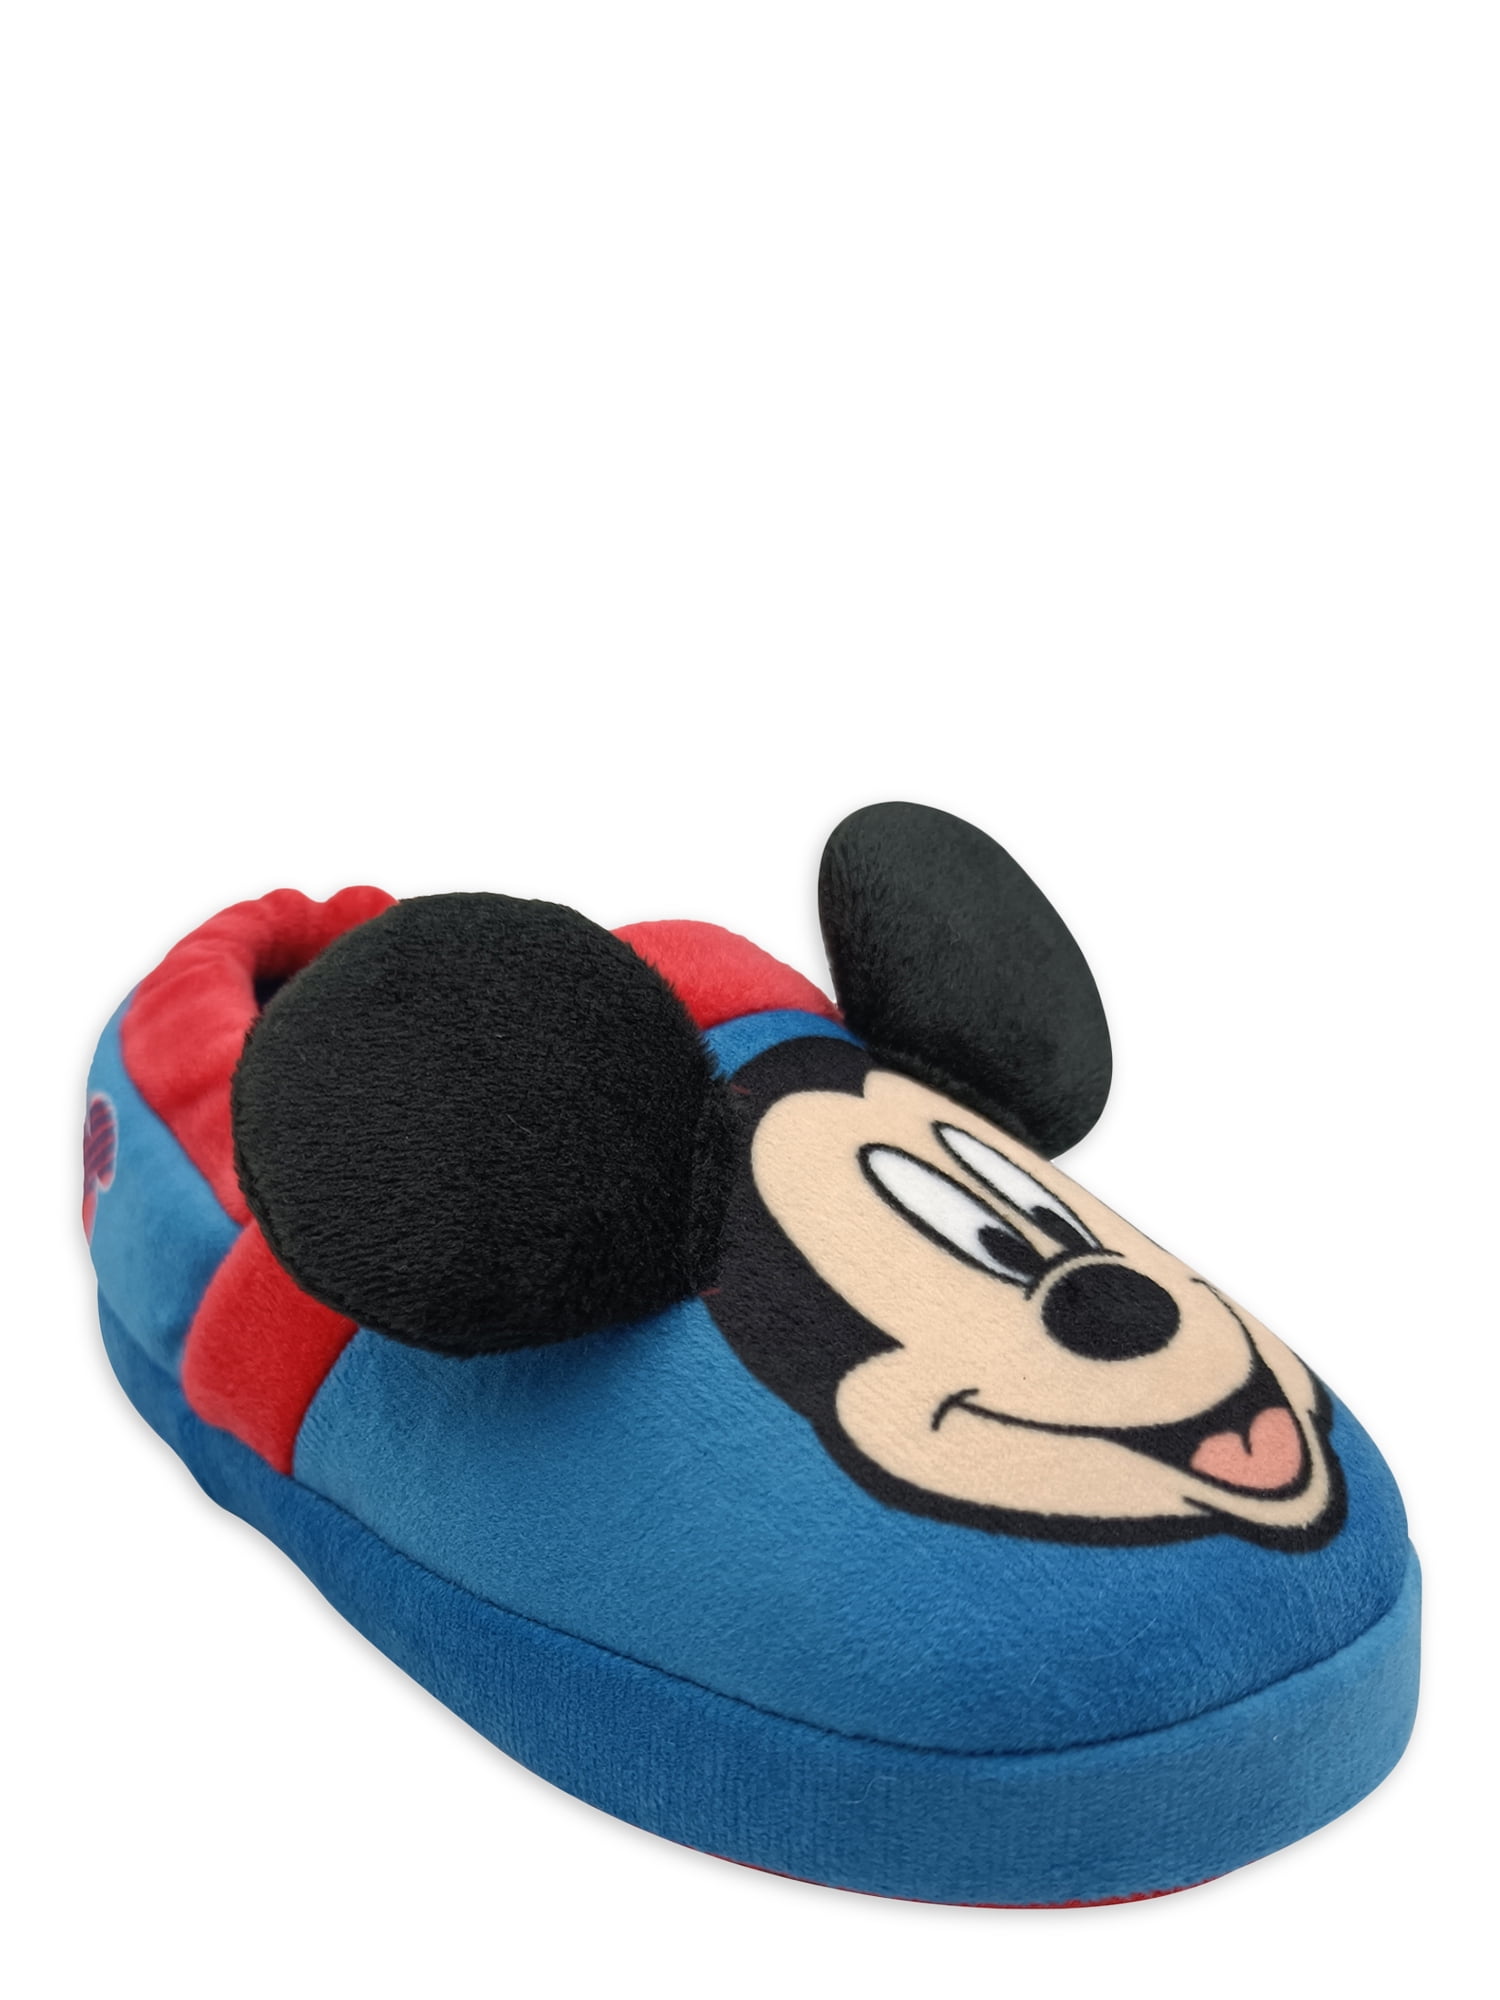 mickey mouse house slippers